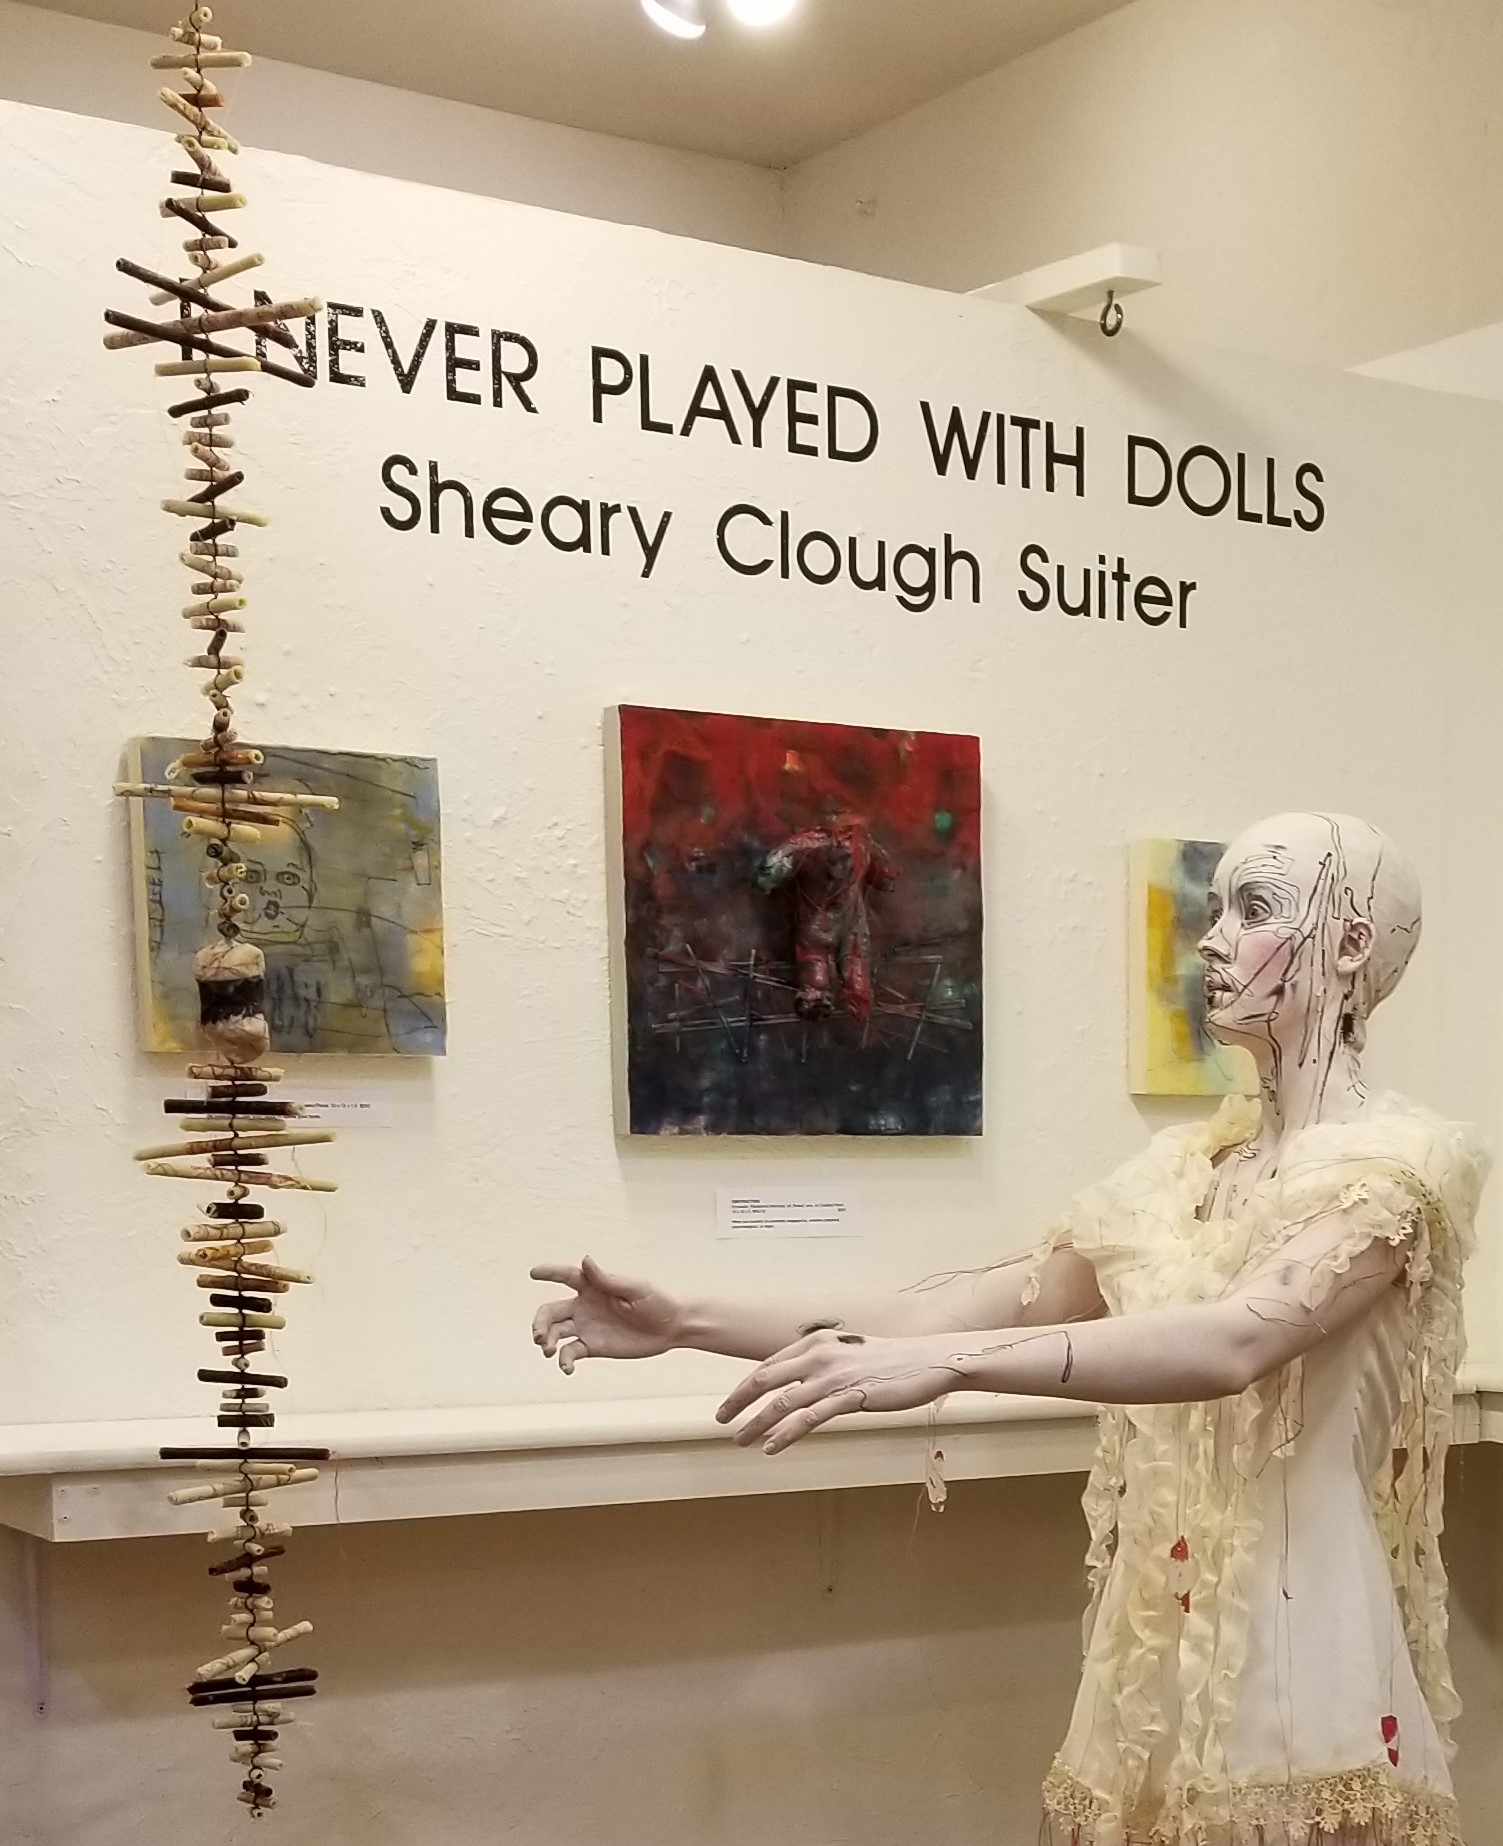 STORED KNOWLEDGE, Installation view with “Living Doll” performance artist Julia Greene. https://www.sheary.me/dolls